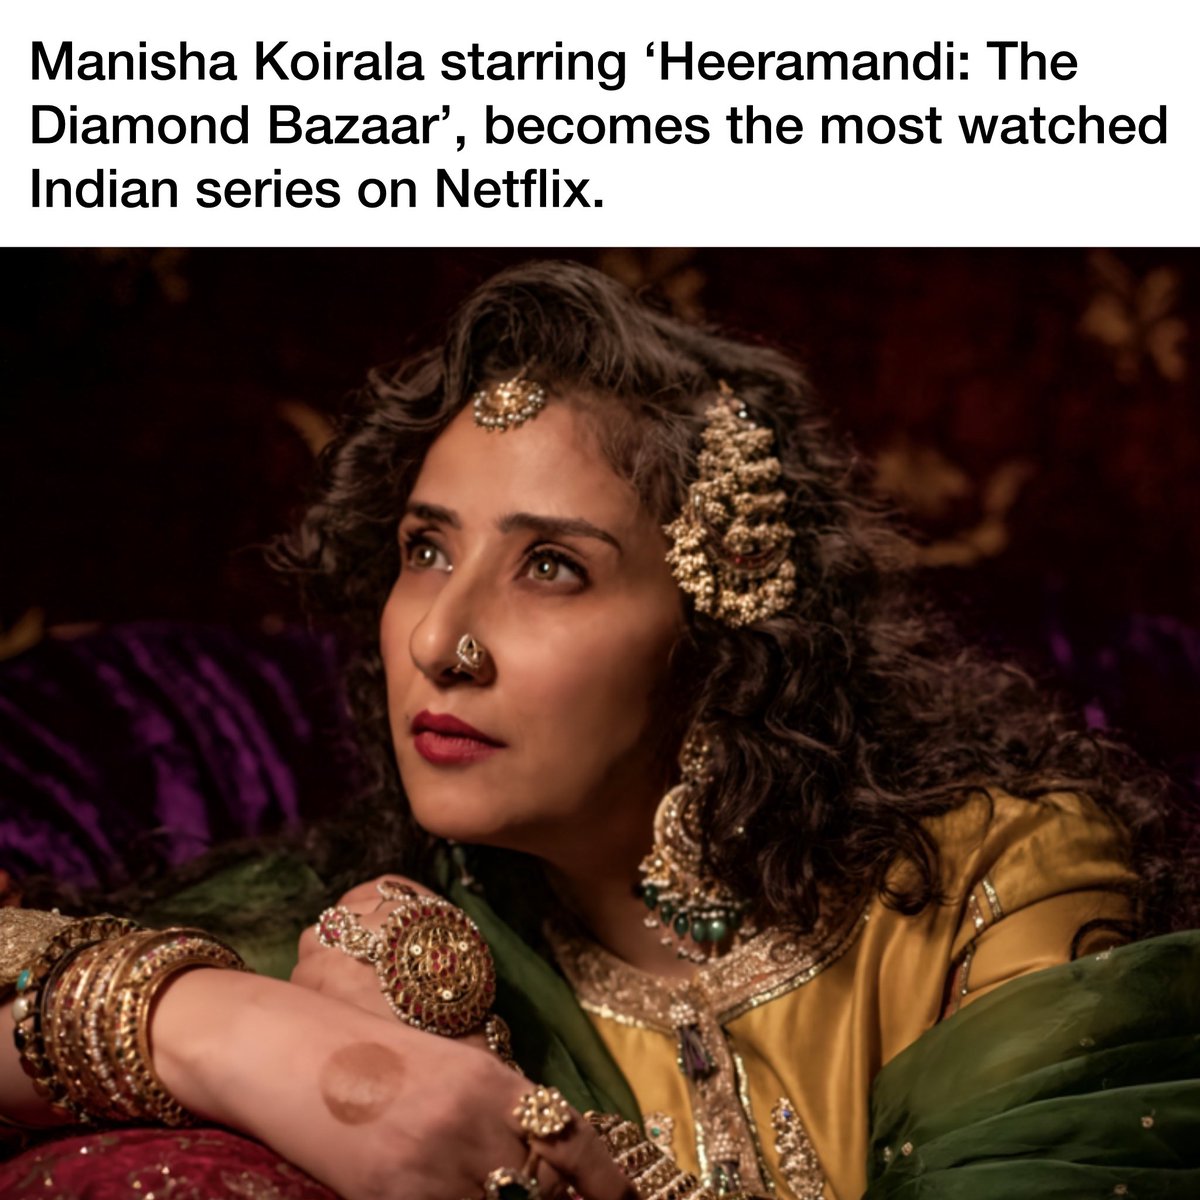 RECORD: Manisha Koirala starring ‘Heeramandi: The Diamond Bazaar’ became the most-viewed Indian series on the OTT platform. The series is also on the number 2 position in Non-English TV list with some 4.5 million views, and 33 million accumulated viewership hours.